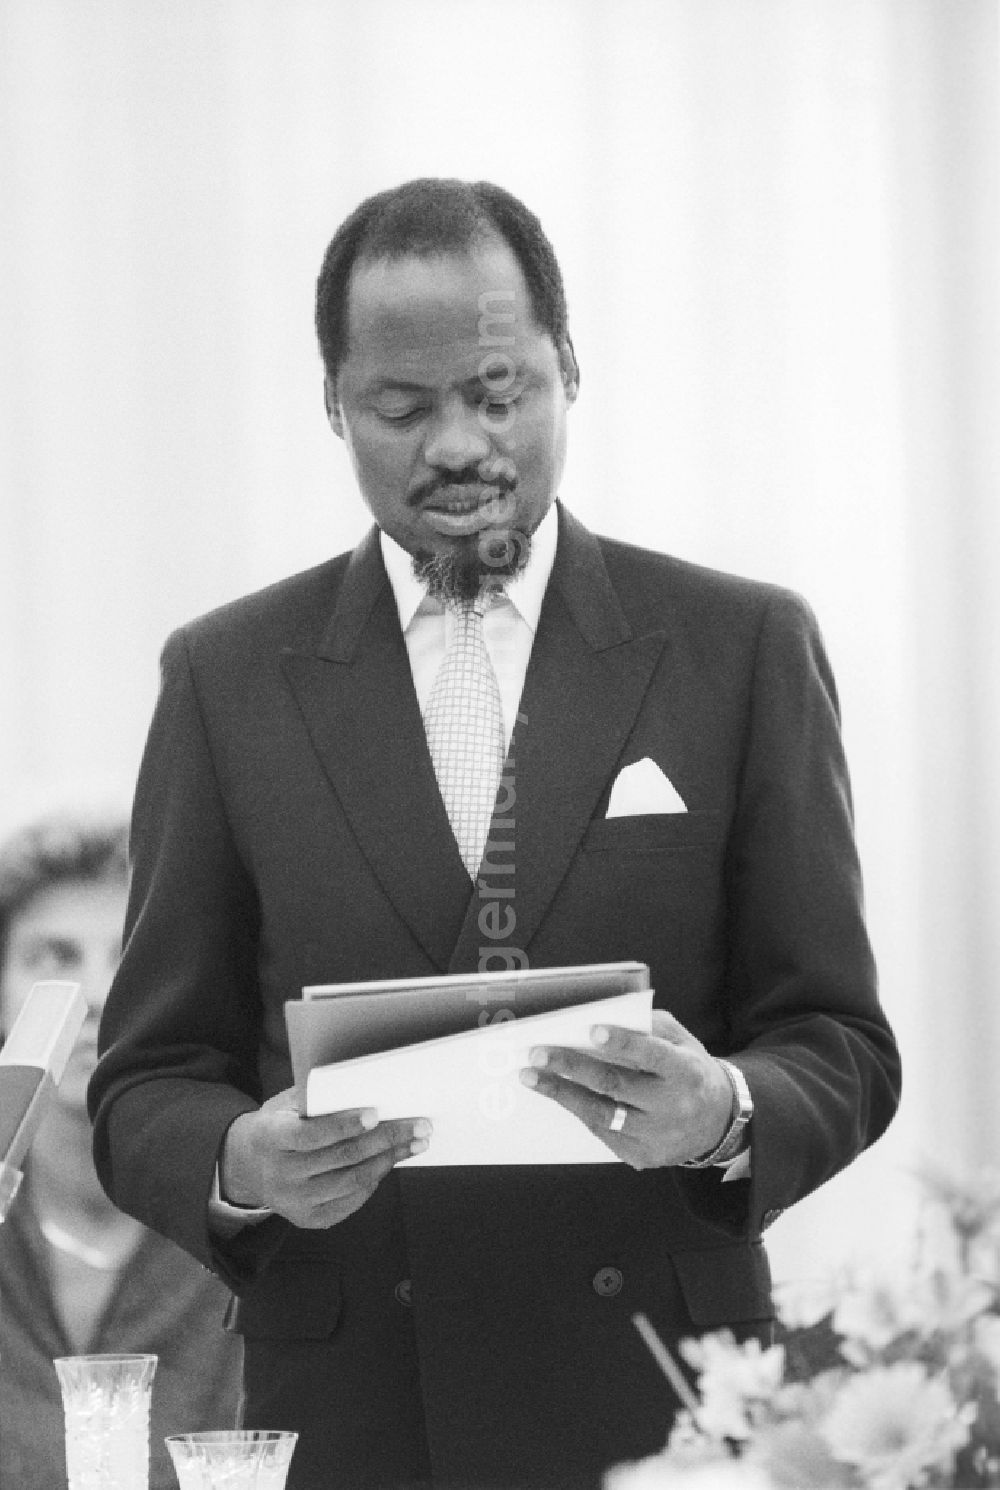 GDR photo archive: Berlin - Since Frelimo Party and President of the People's Republic of Mozambique, Joaquim Chissano made a speech in the Red Town Hall in Berlin in the state of Berlin in the area of the former GDR, German Democratic Republic